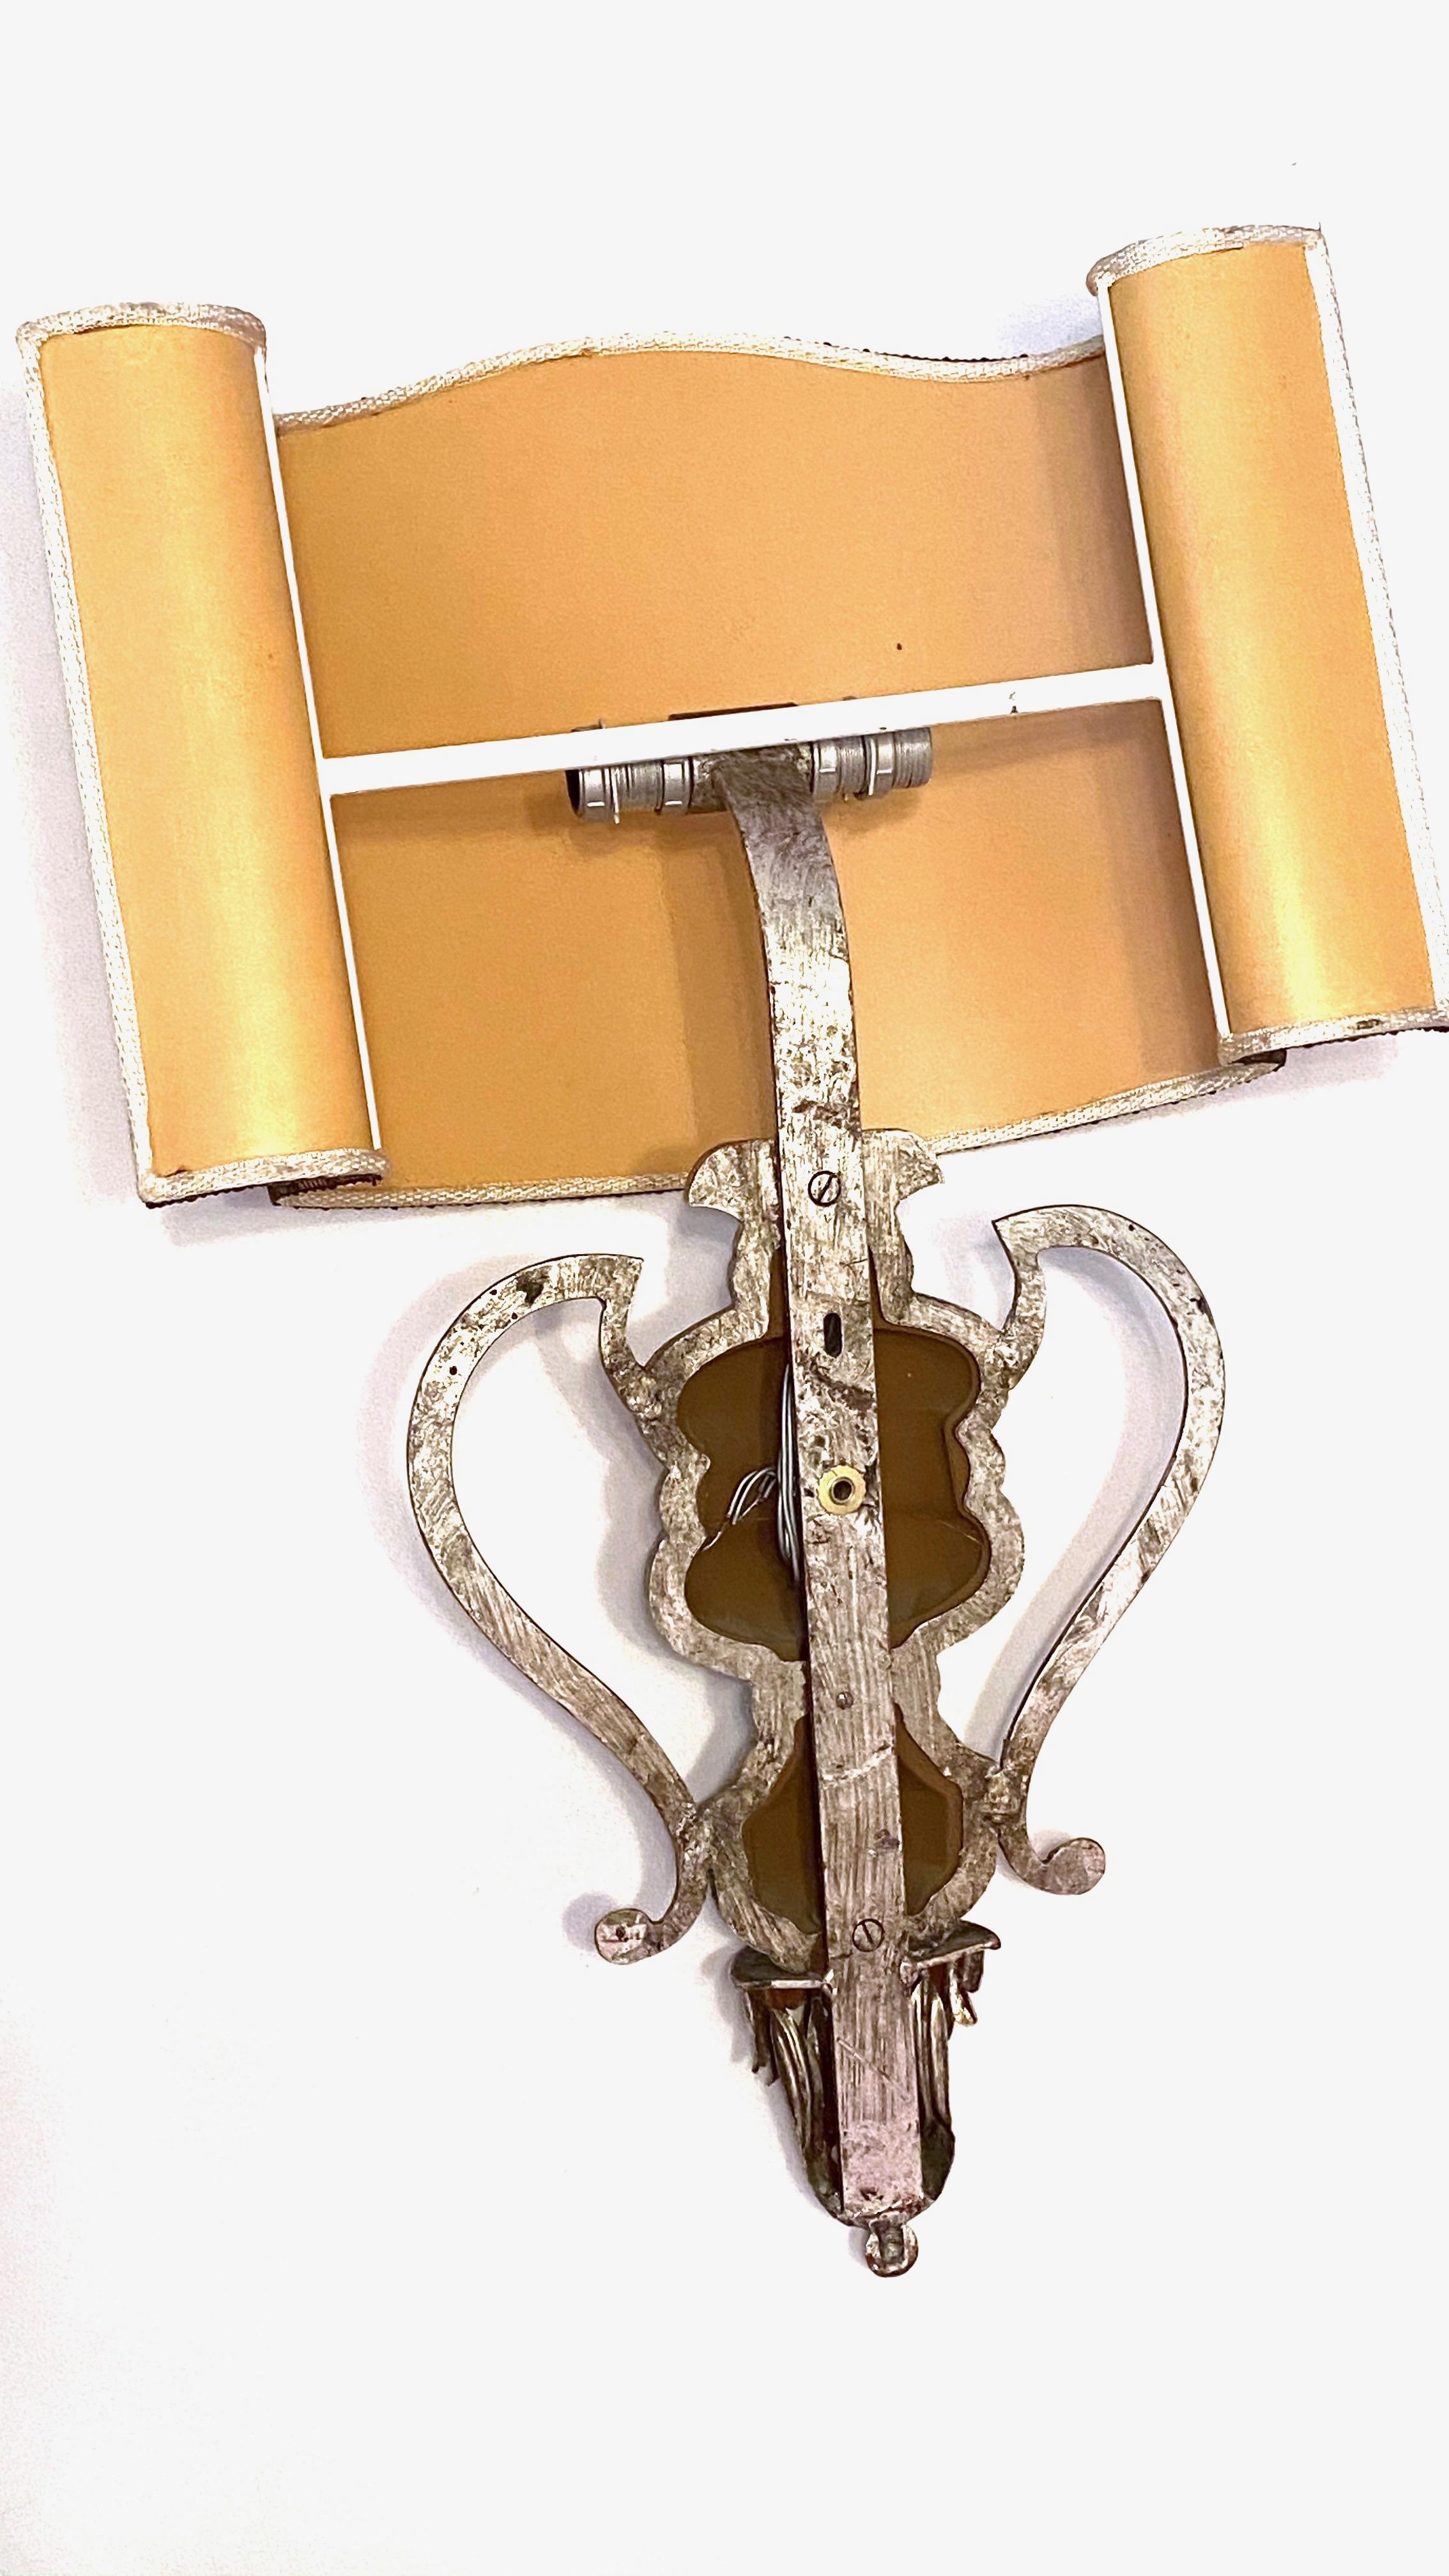 Metal Gorgeous Monumental Italian Crystal Urn Motif Wall Sconce by Banci Florence For Sale